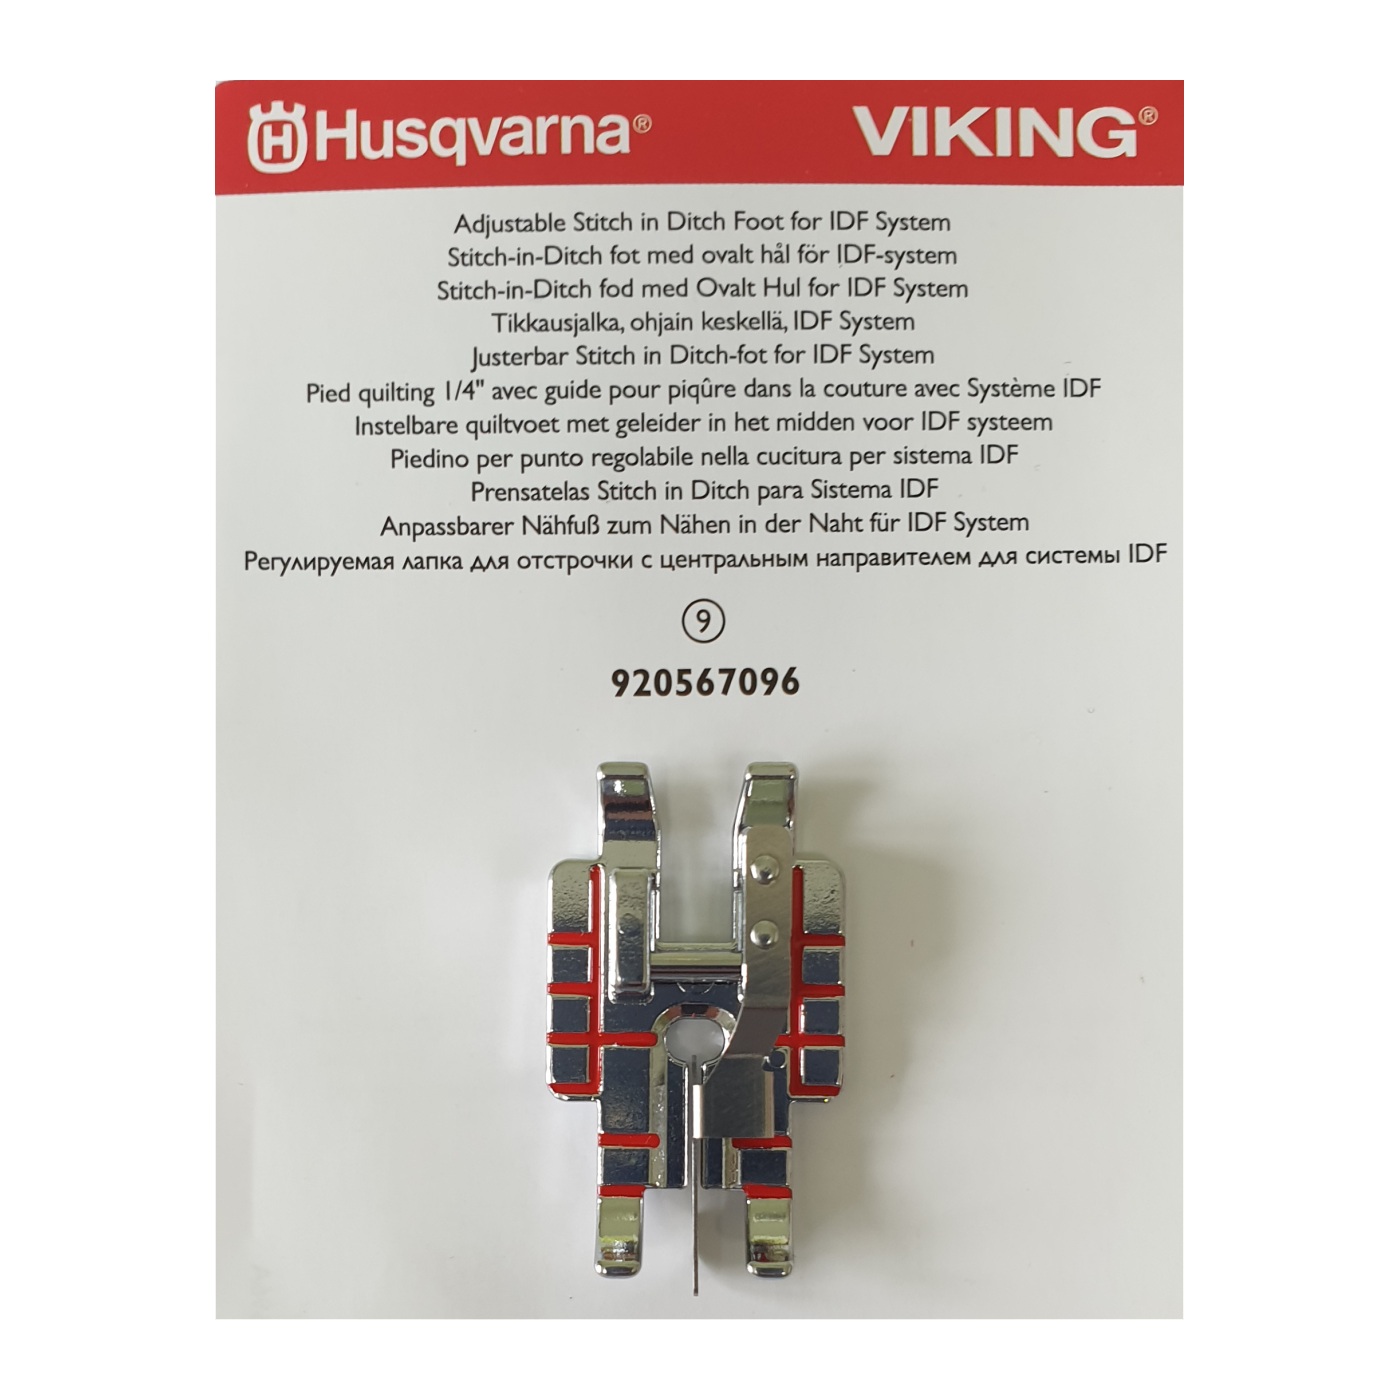 Husqvarna Viking Adjustable Stitch in the Ditch Foot for IDF System 920567096 for Sale at World Weidner